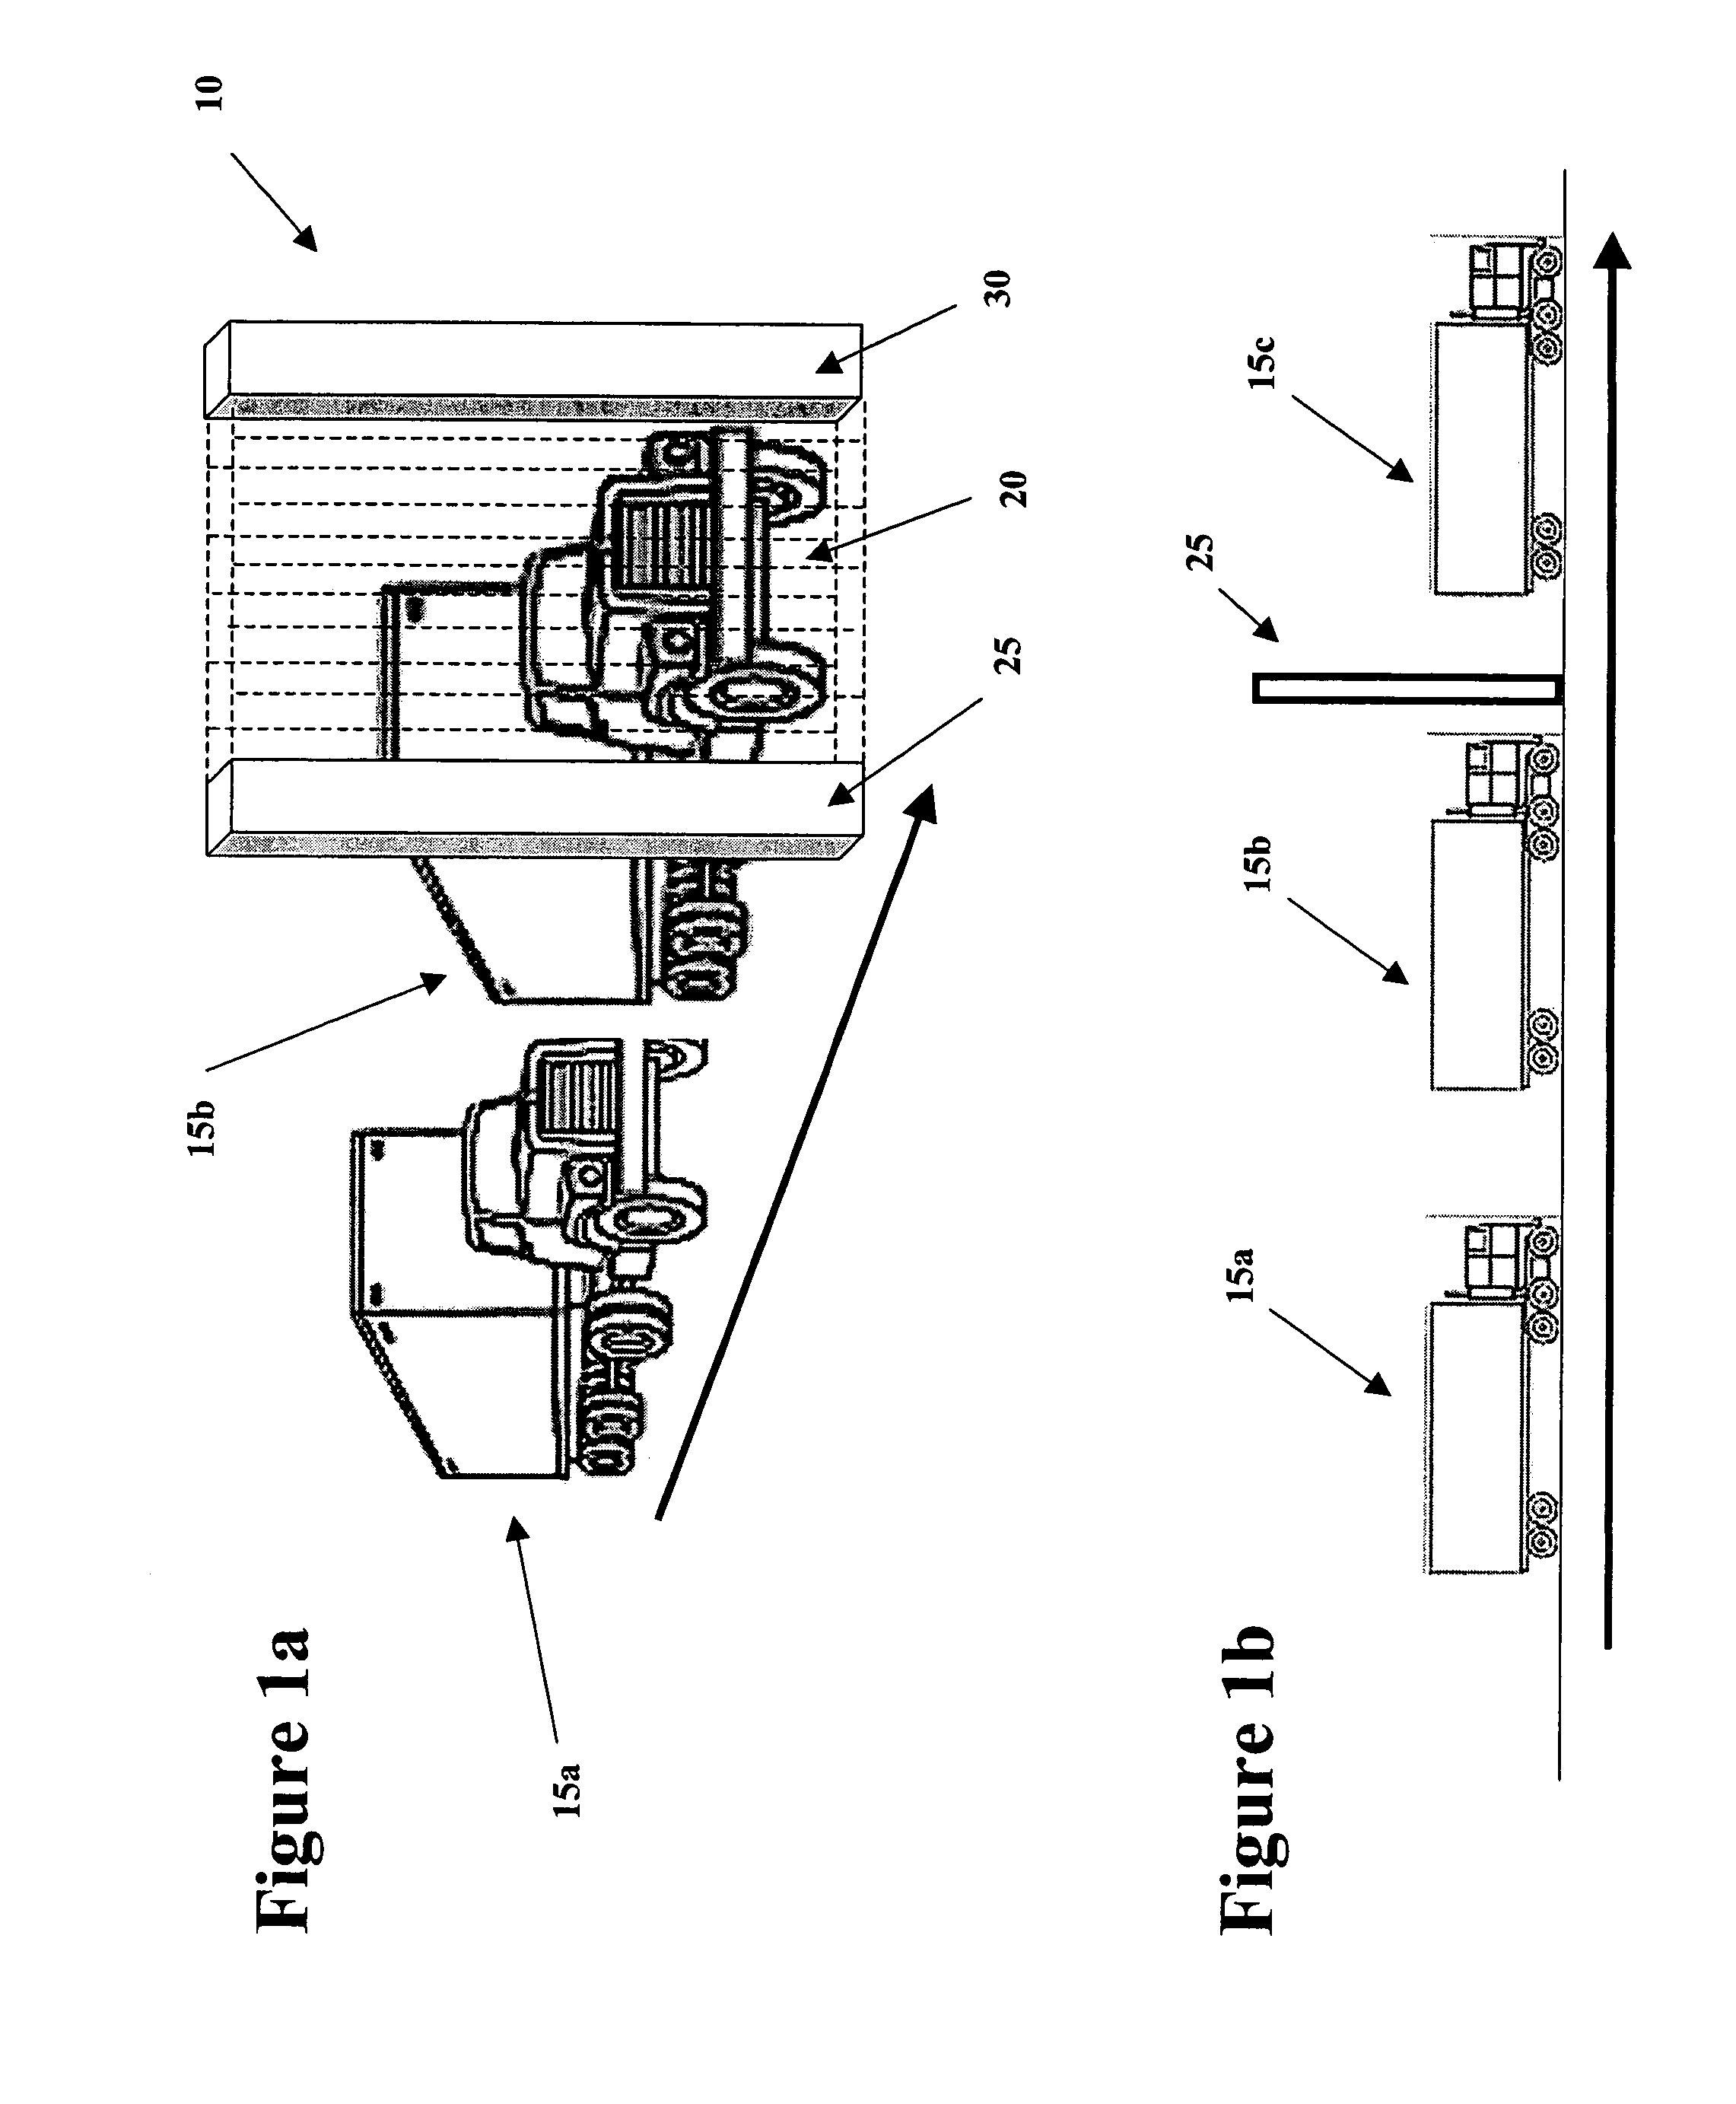 Methods and systems for imaging and classifying targets as empty or non-empty